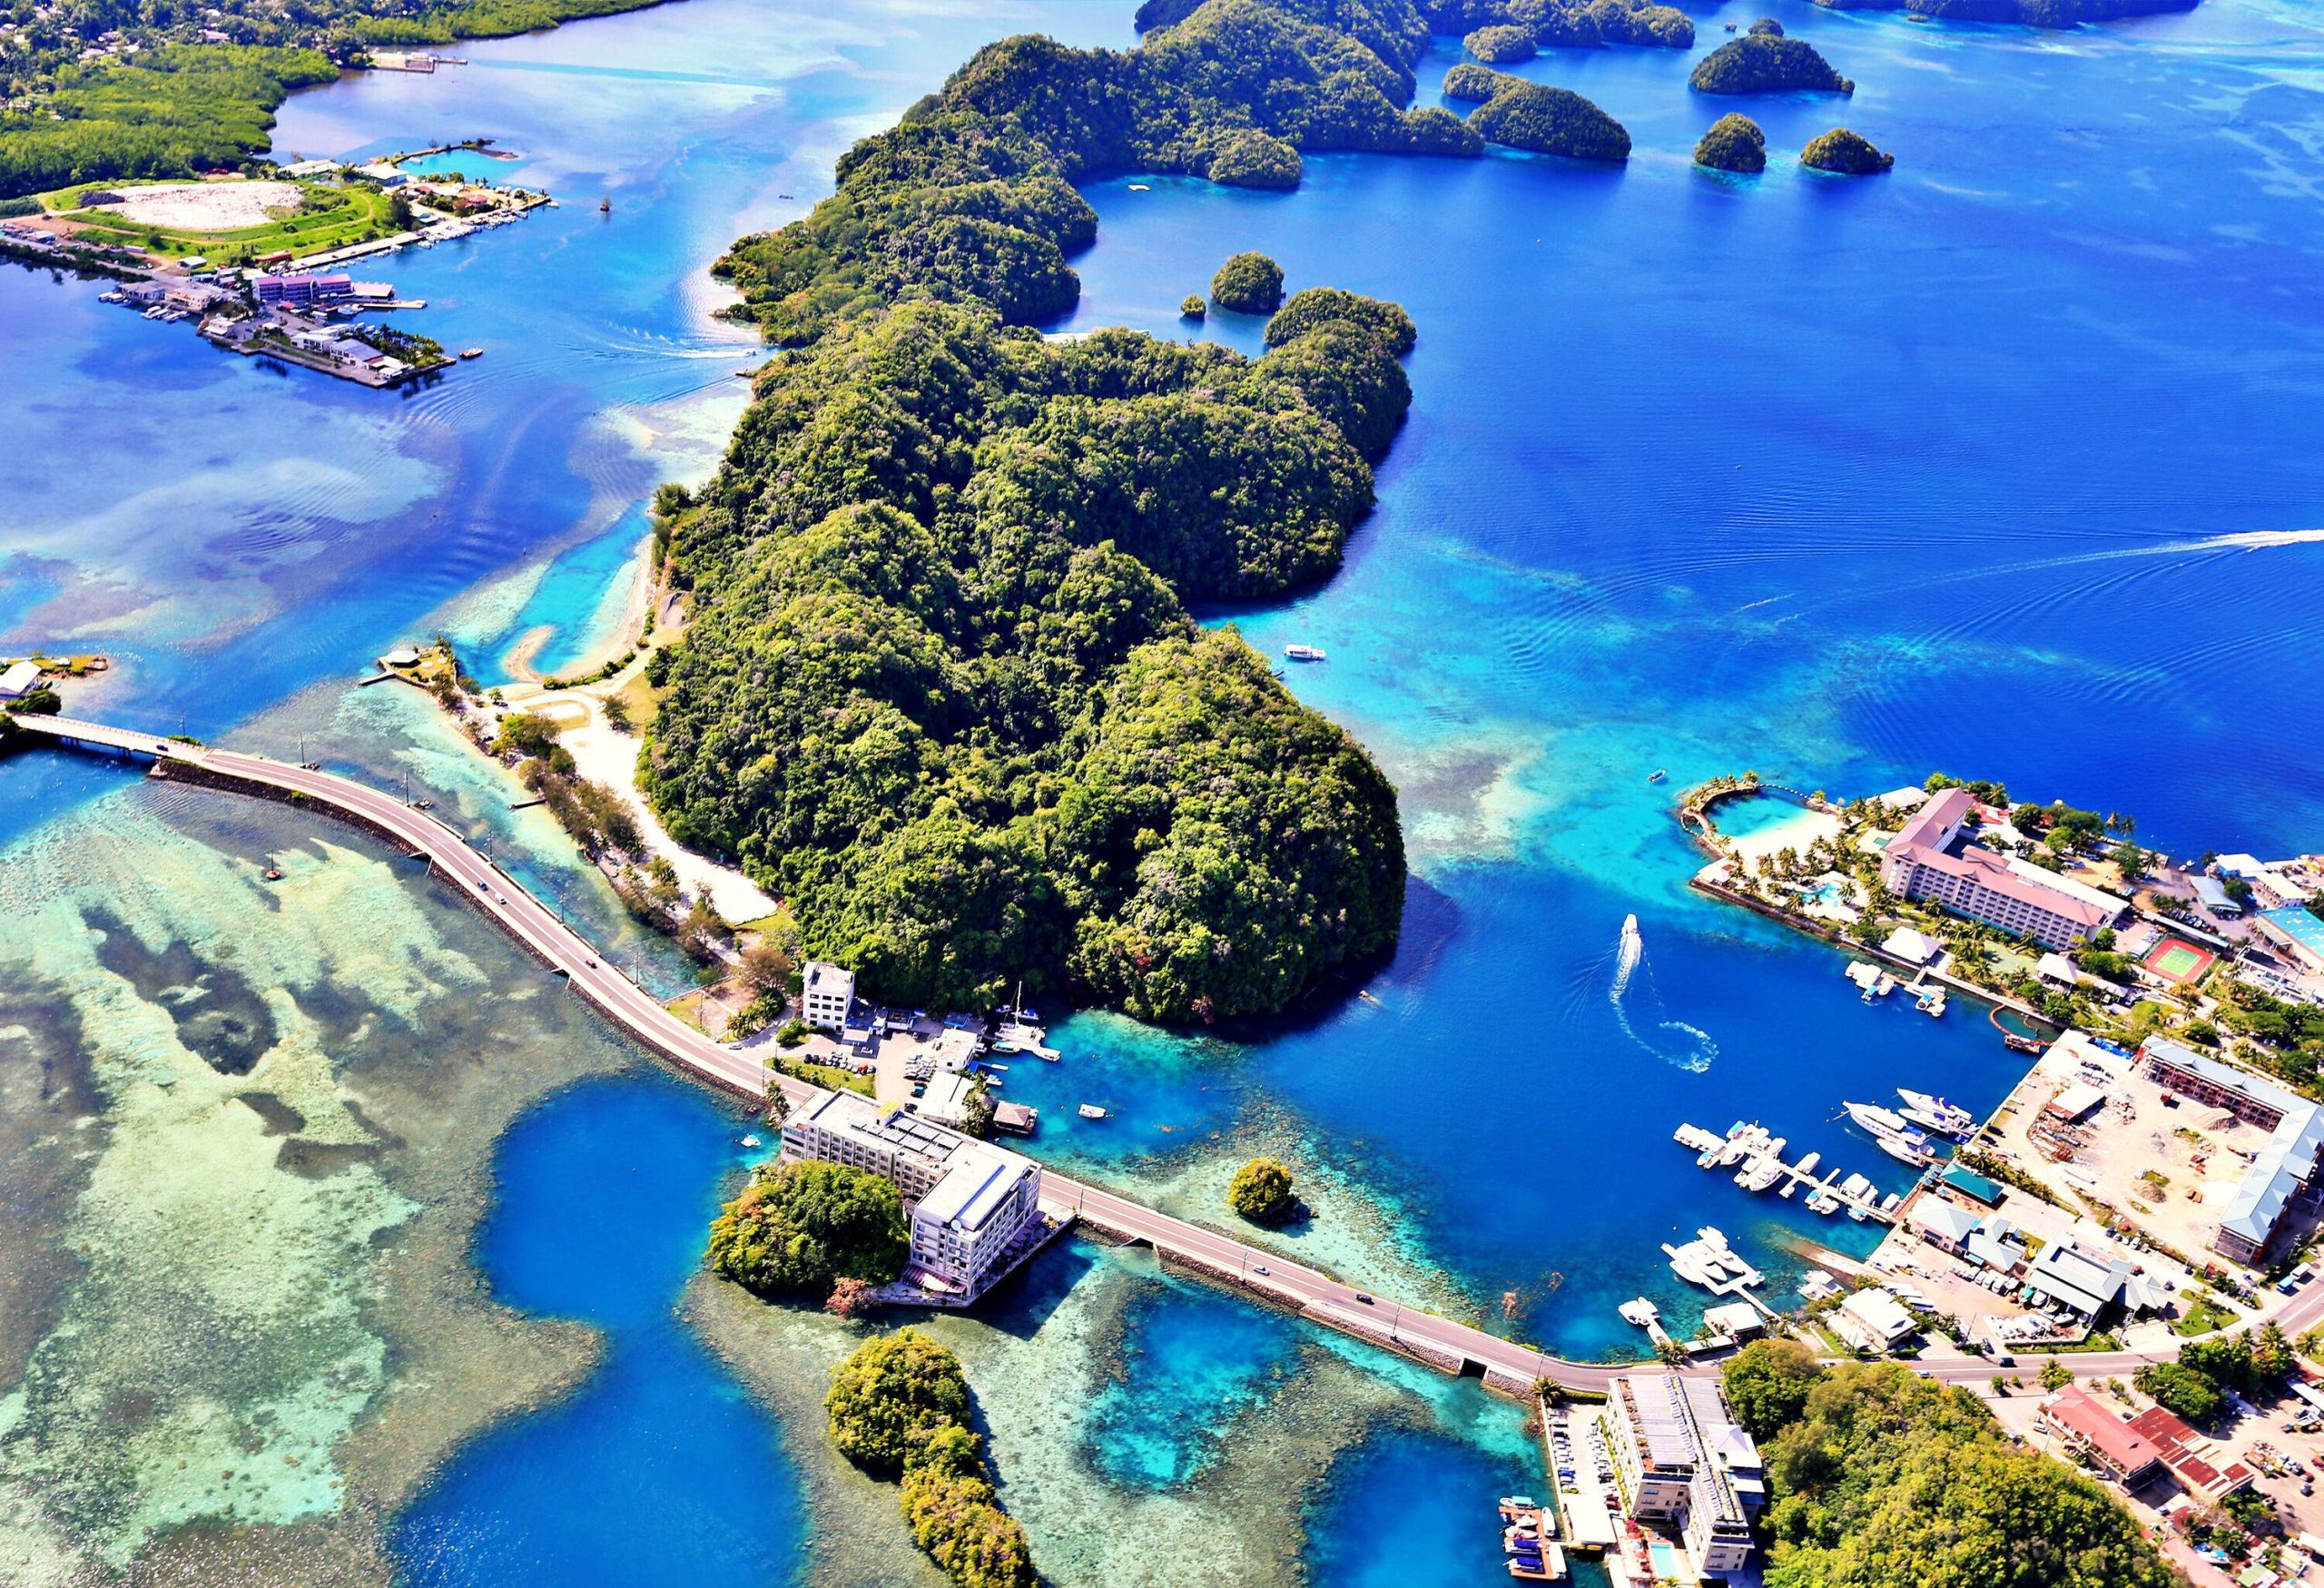 A deep blue ocean crossed by a long road bridge, a forested island, with tall buildings and docks around the coast.